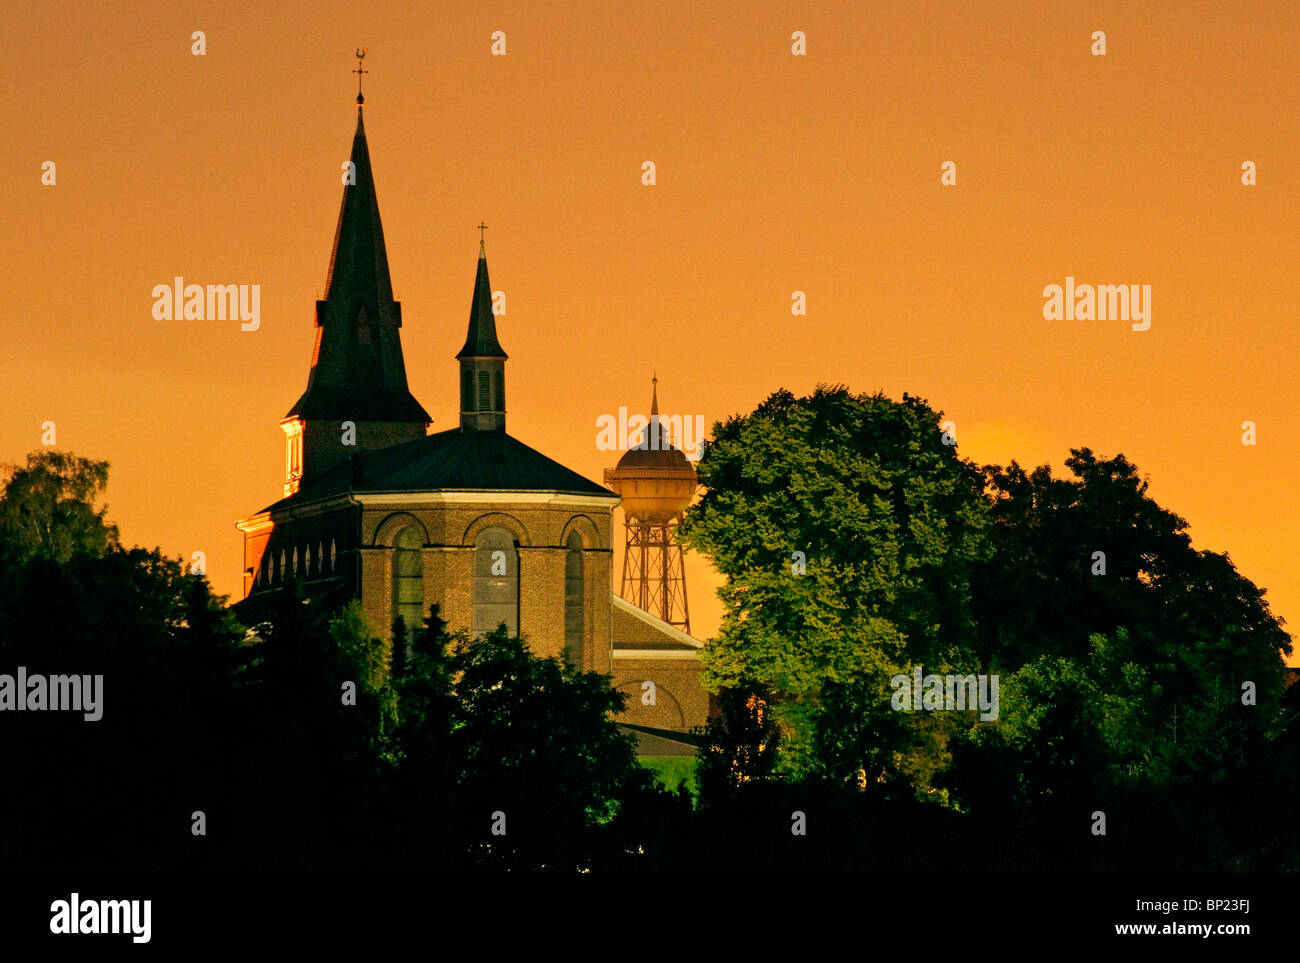 Church__water_tower_at_night_set_against